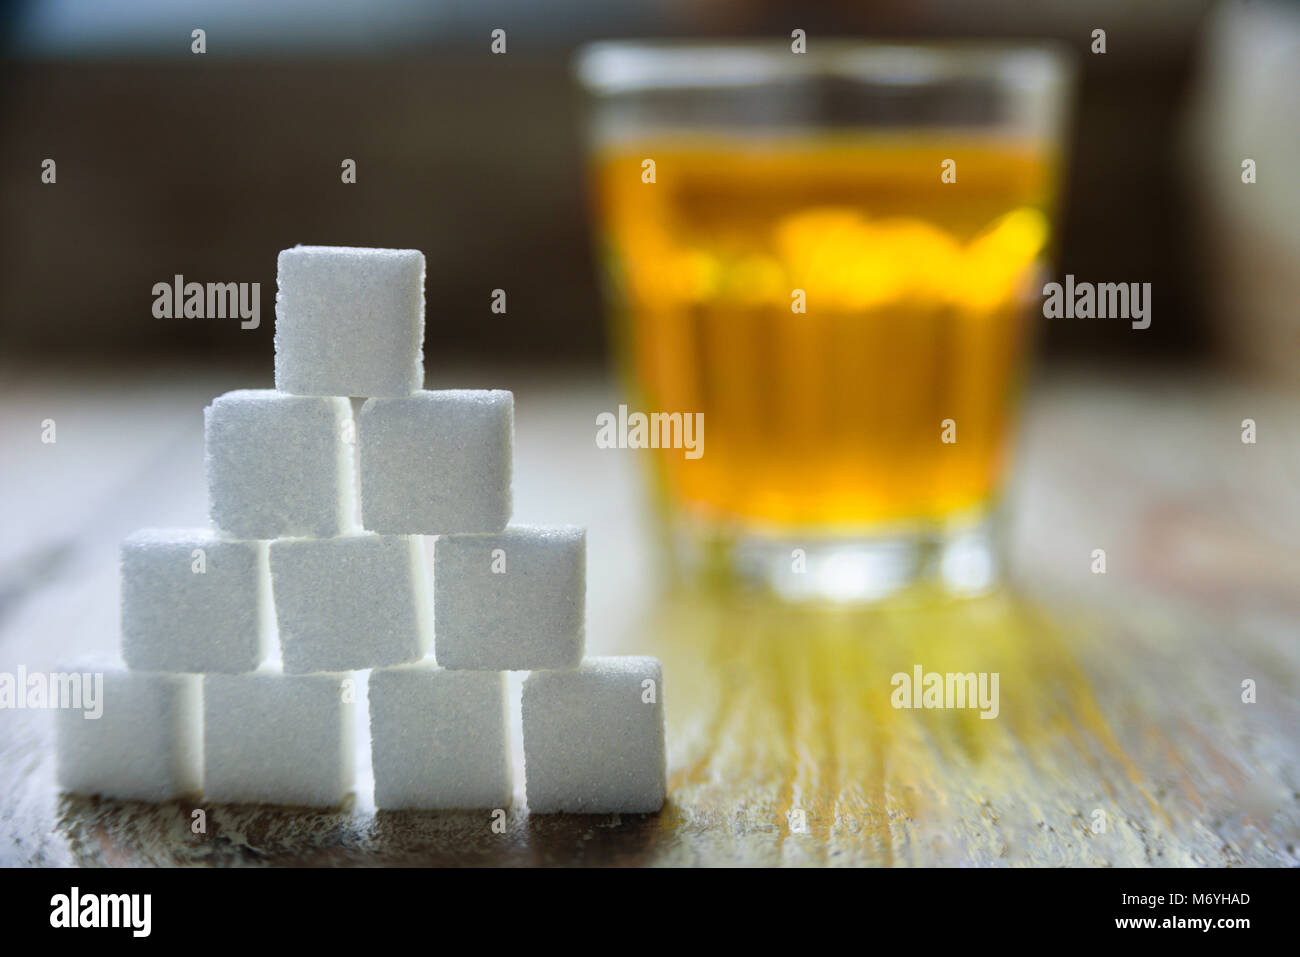 Sugar cubes with apple juice on background. Sugar danger concept Stock Photo